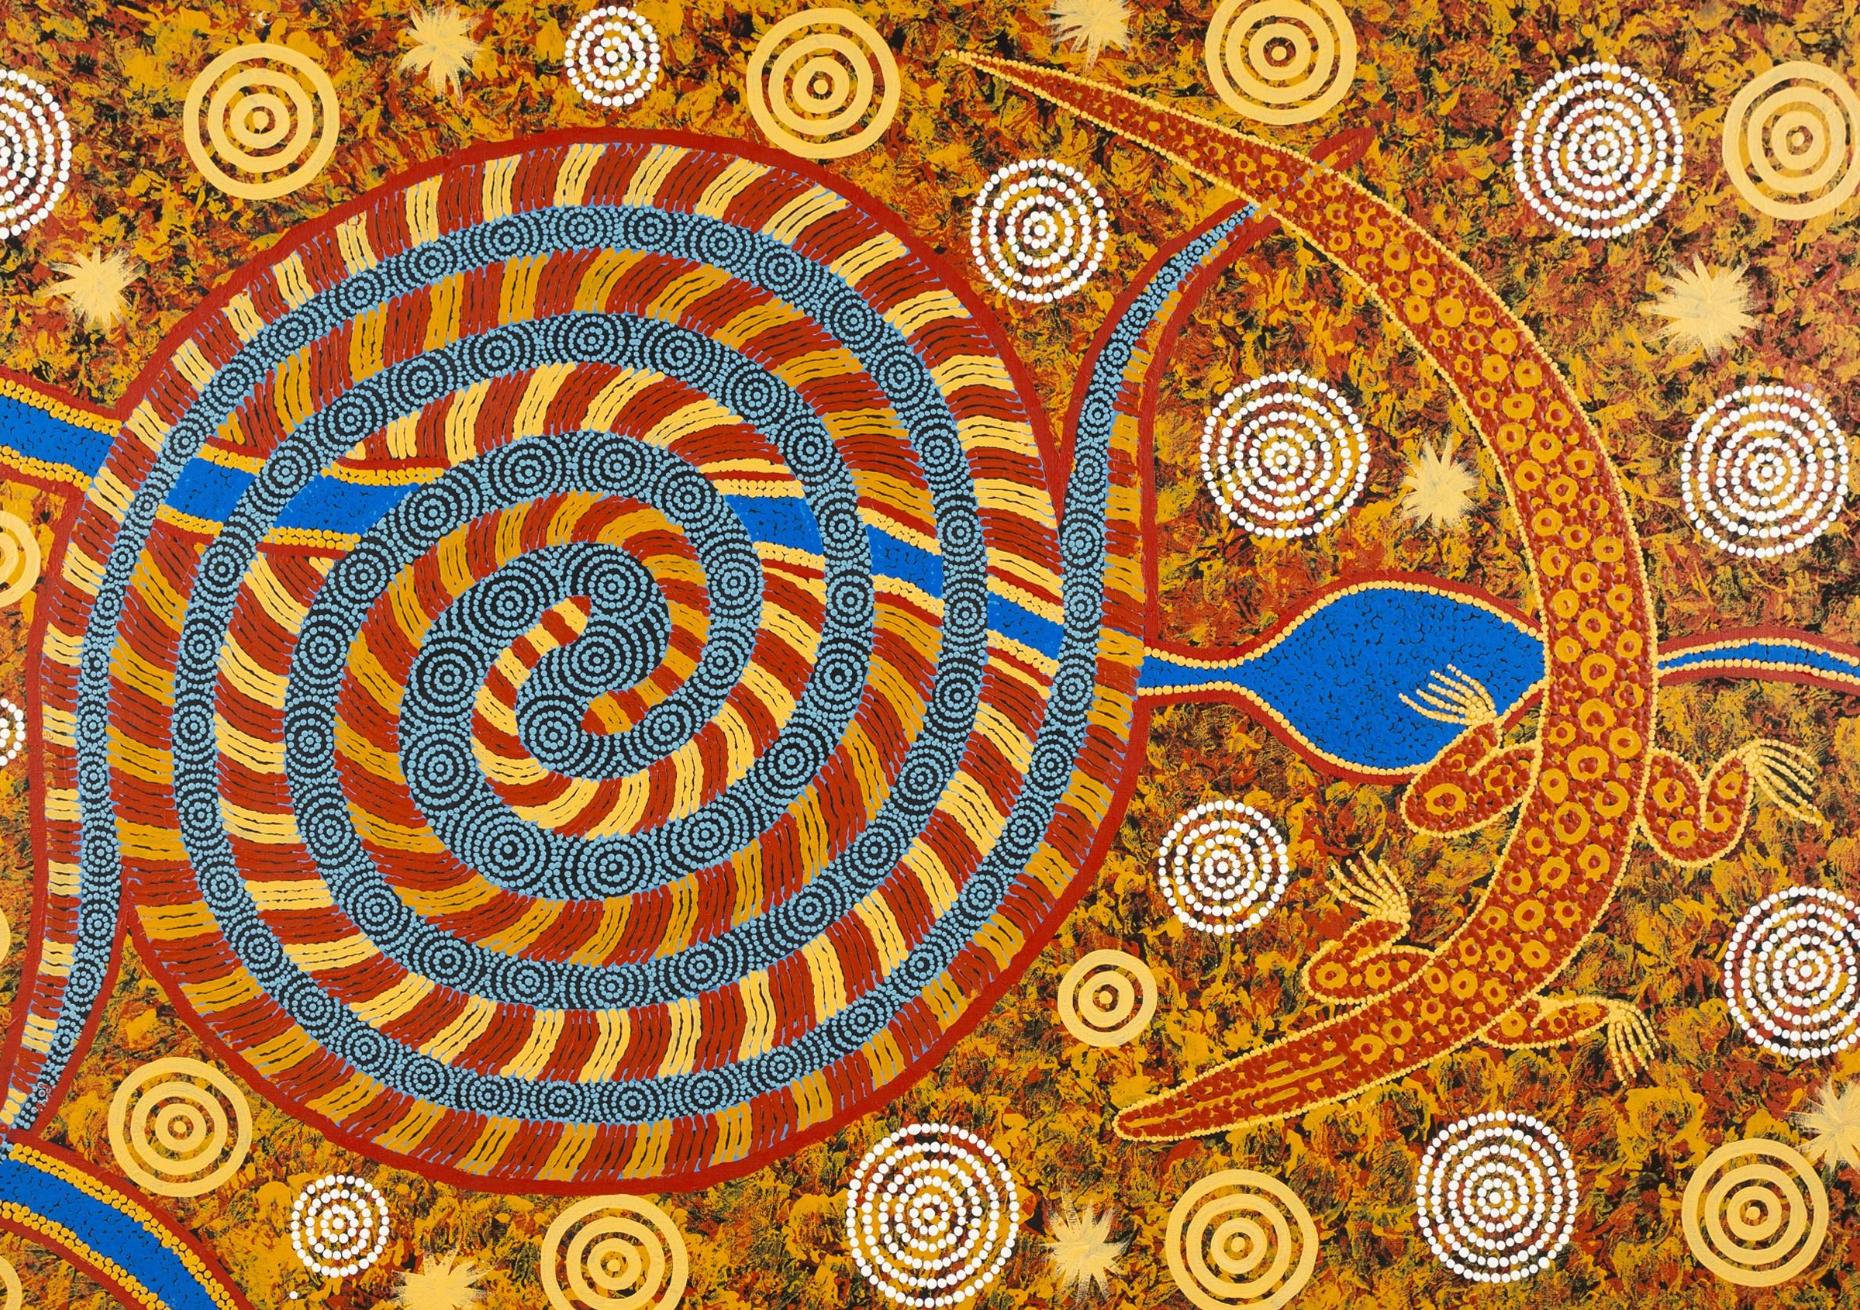 Lander River to Purtulu, Mount Theo - VERY LARGE Colorful Aboriginal Painting 5